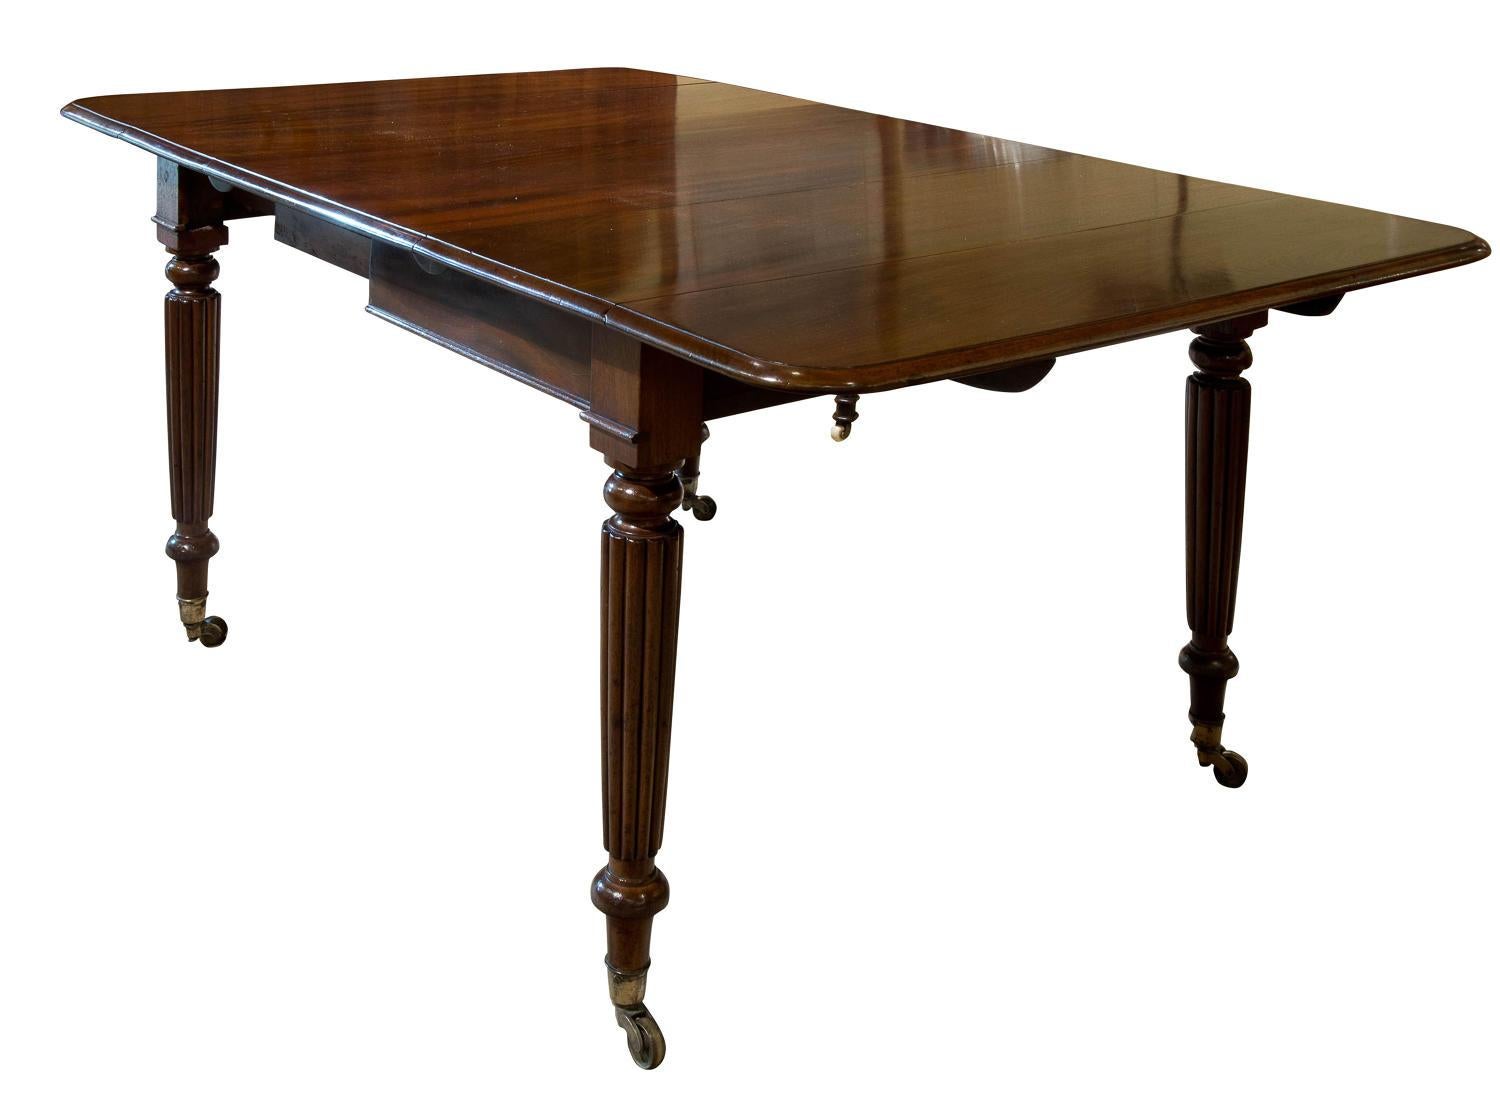 Mahogany drop-leaf dining table on reeded legs and brass castors,

circa 1830.

Width 167cm when open.